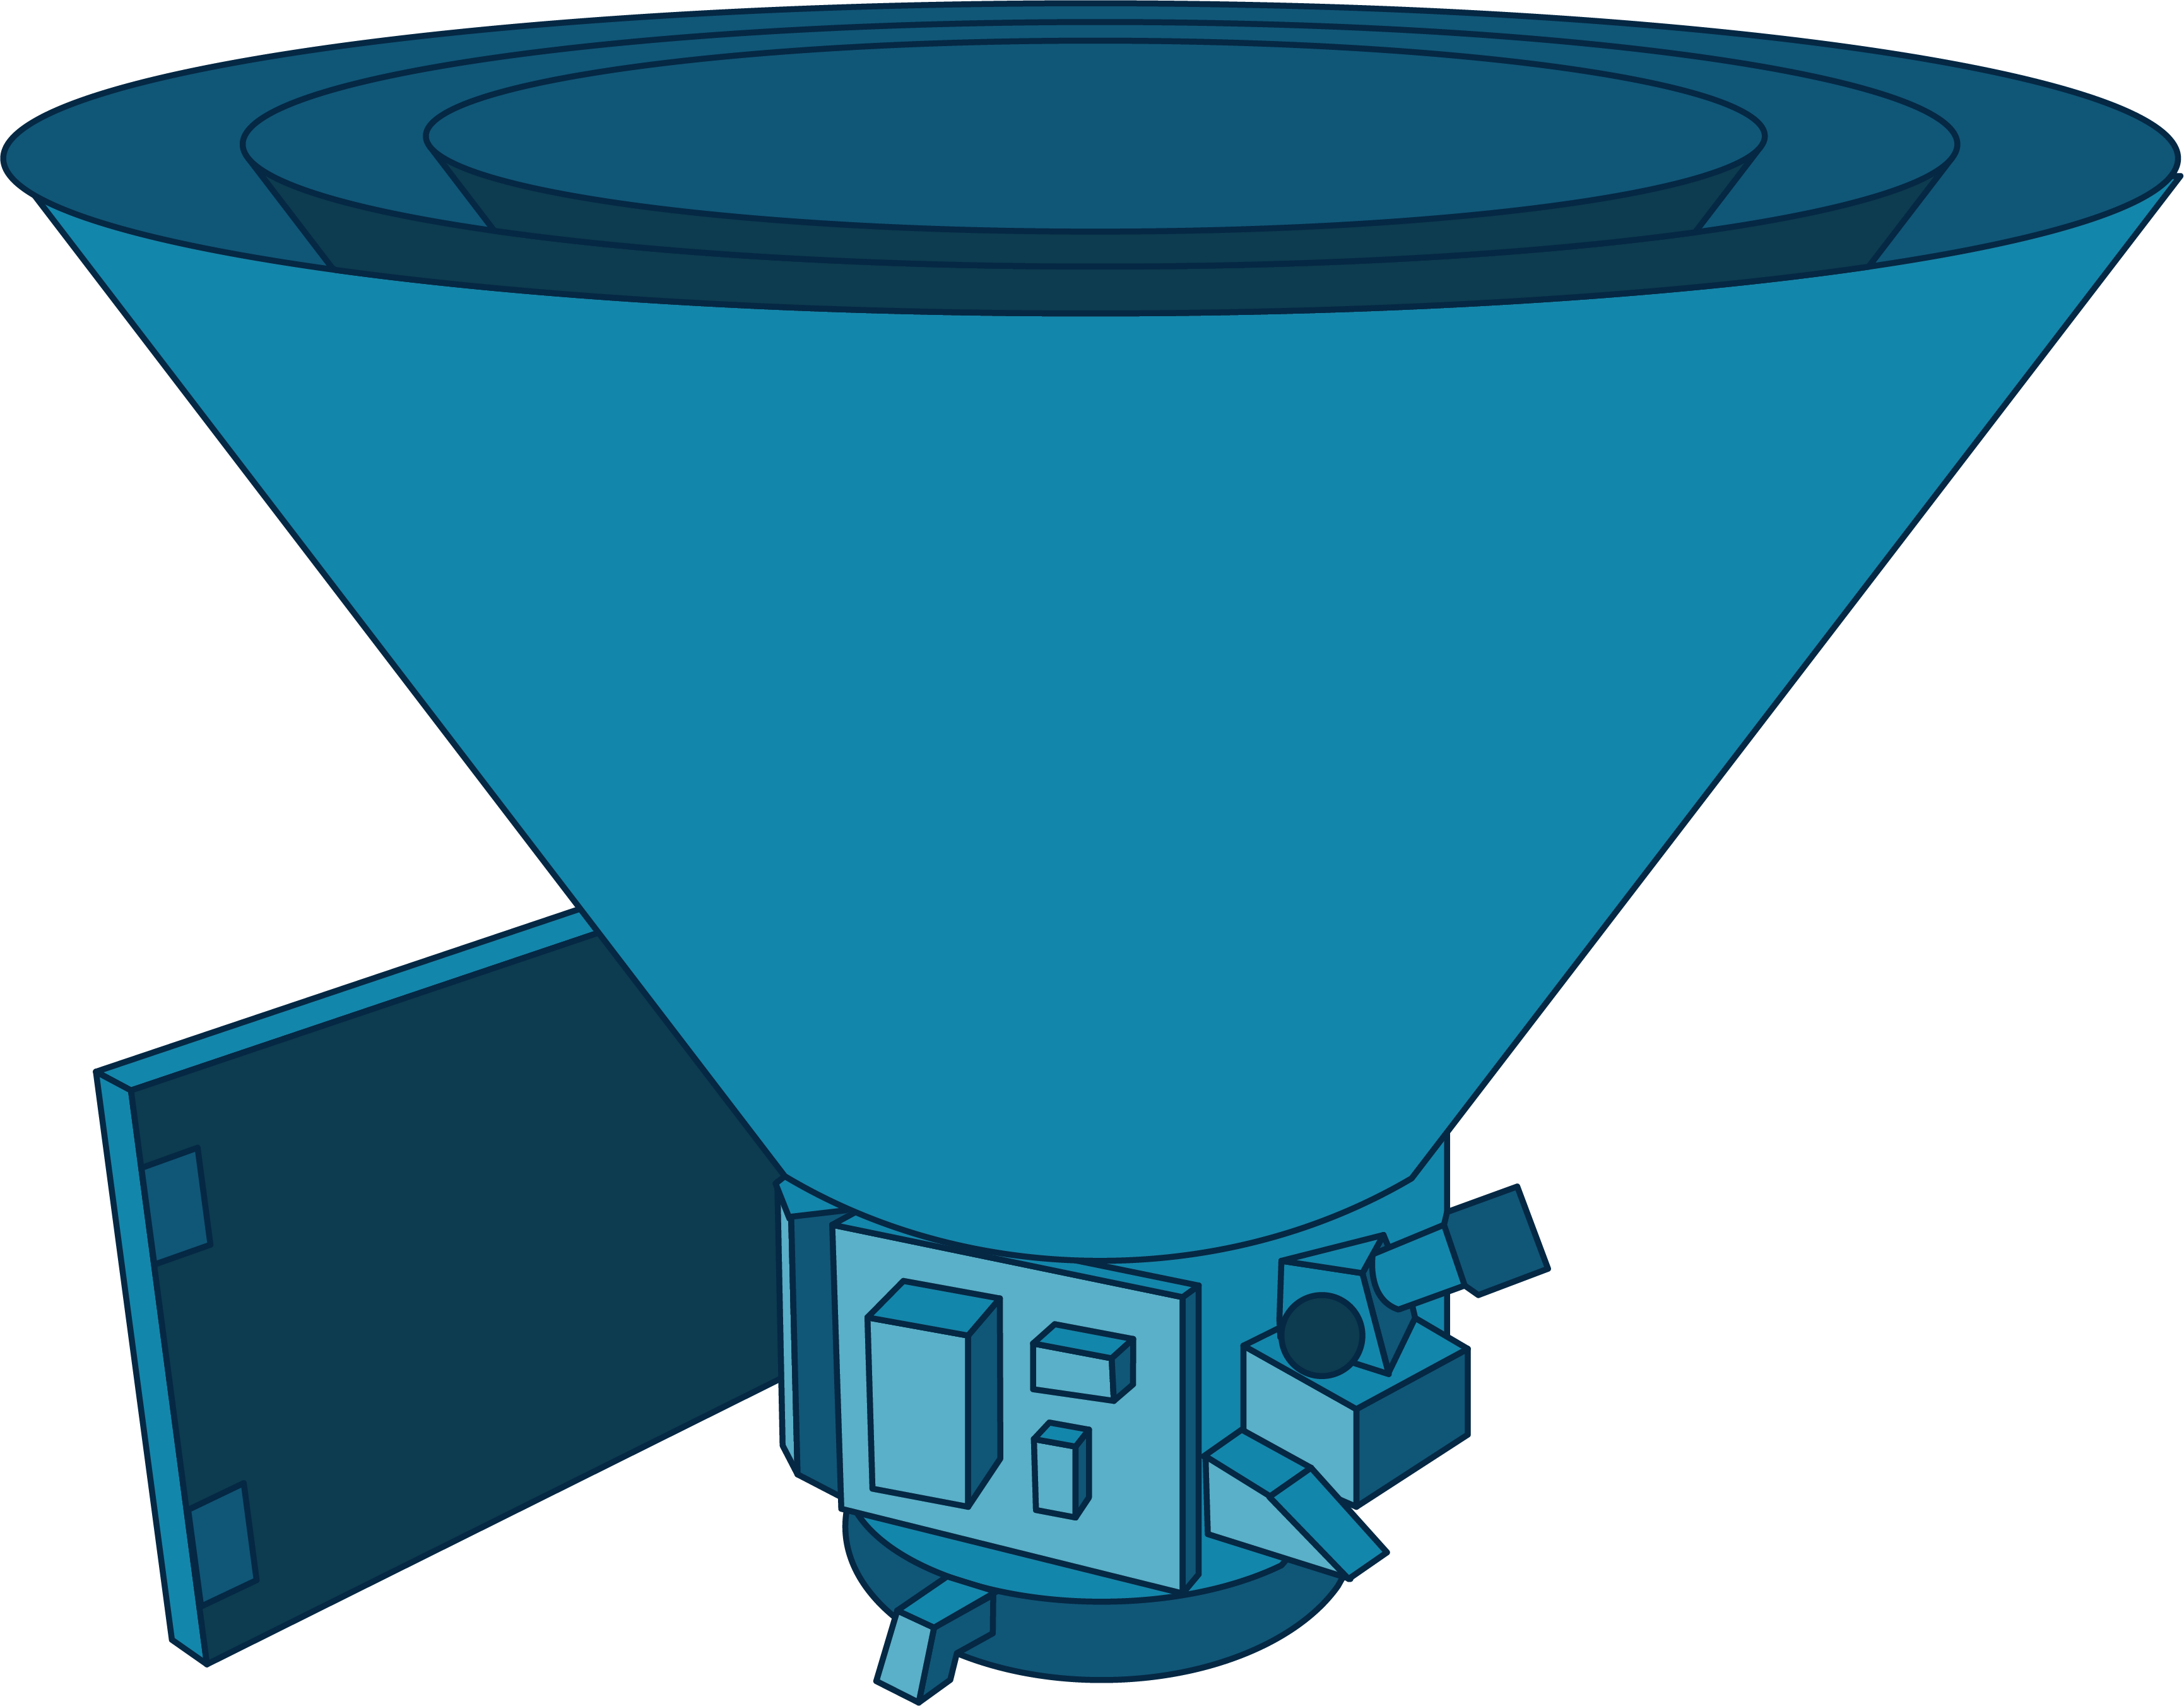 This illustration of NASA's SPHEREx mission shows the spacecraft in shades of blue. The main body of the spacecraft is cone shaped with smaller cone shapes within it, with a solar array "wing" stemming from the side of the craft.